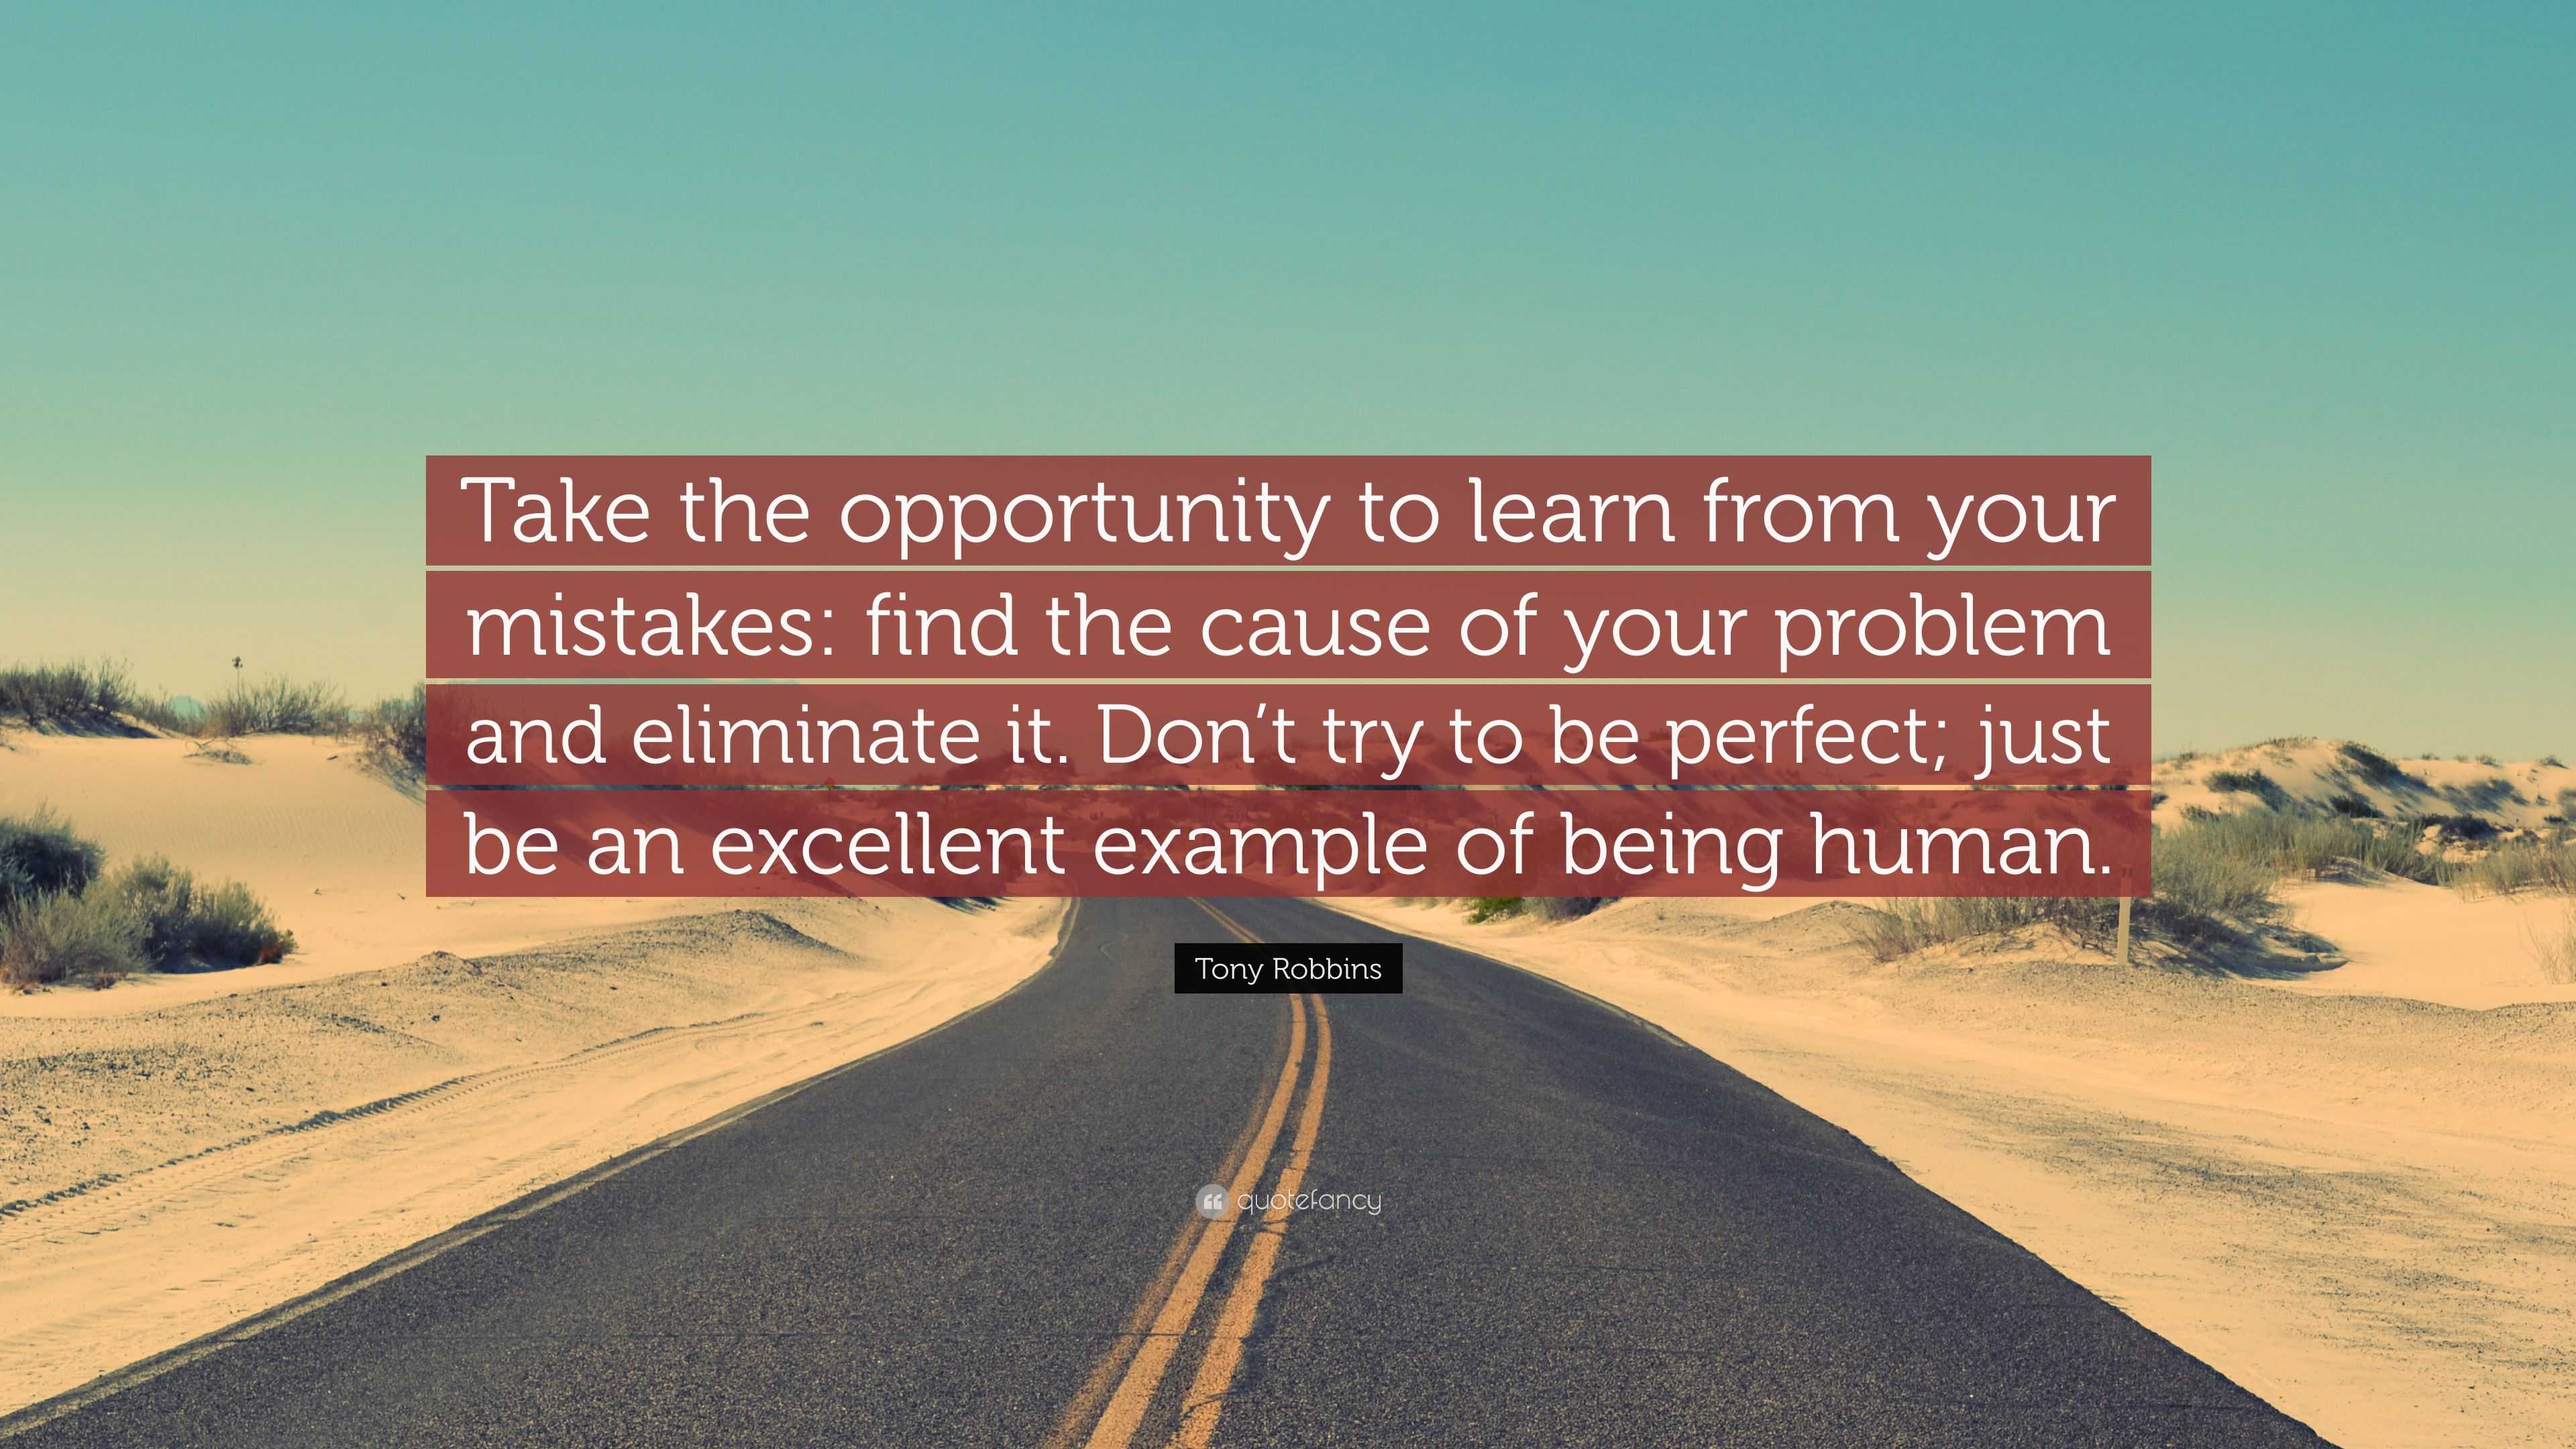 tony-robbins-quote-take-the-opportunity-to-learn-from-your-mistakes-find-the-cause-of-your